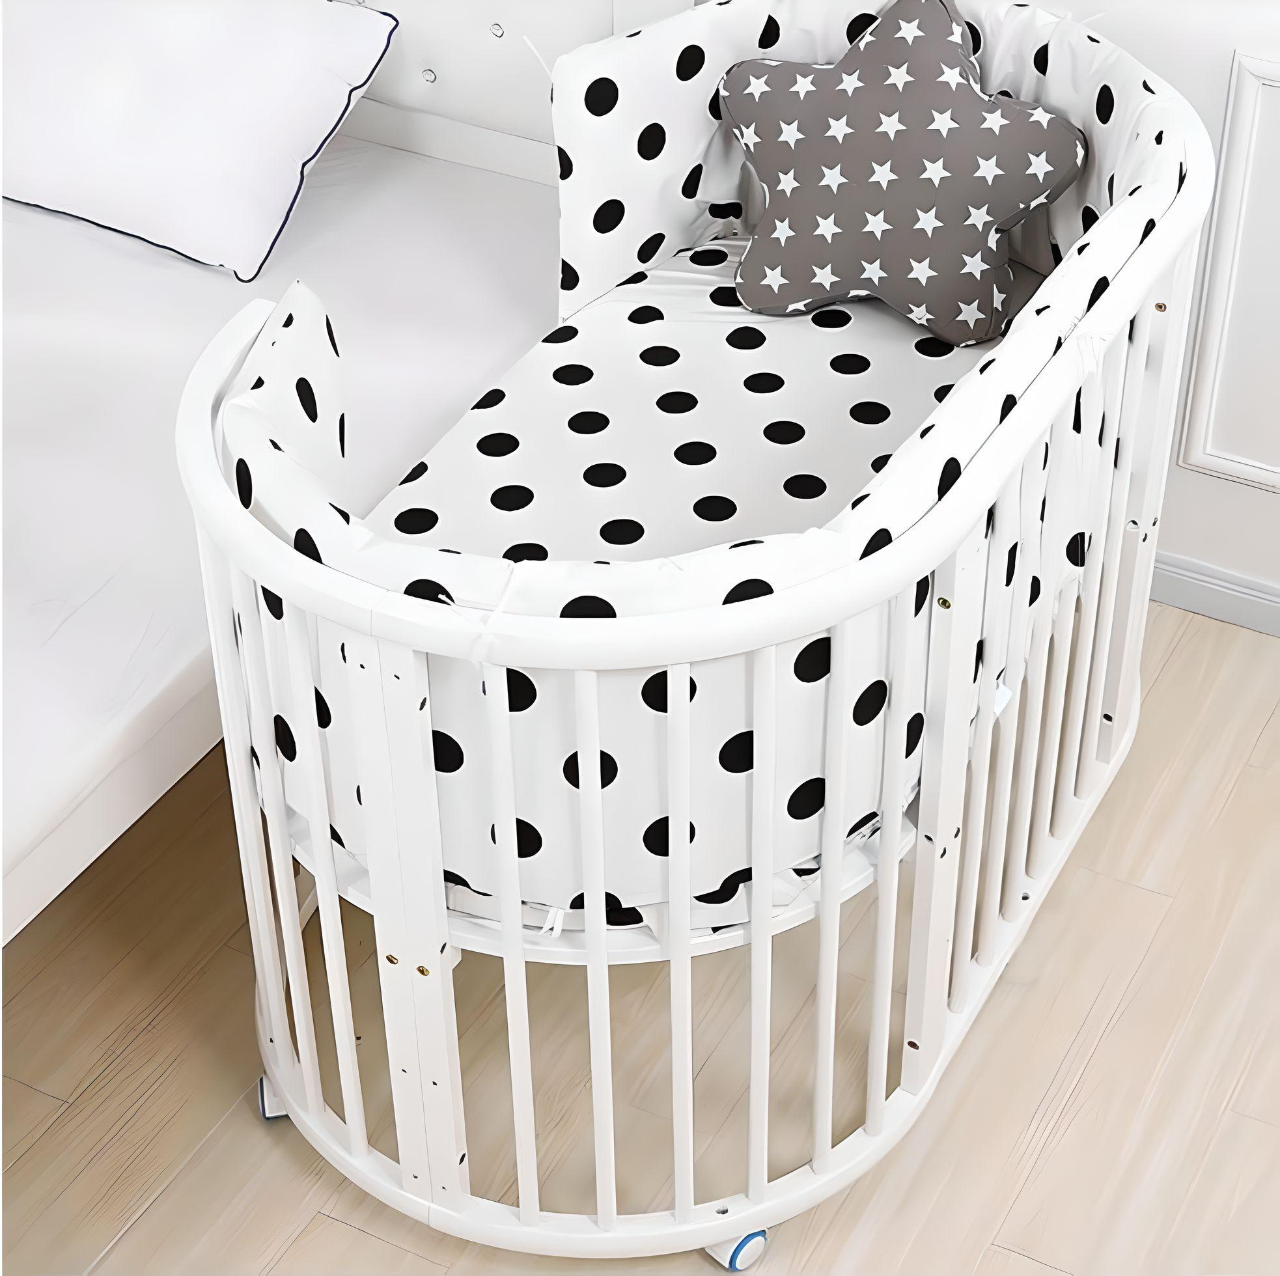 Evelyn 6 in 1 Multifunctional European Oval Pinewood Crib Cot (White). Newborn - 15 Years